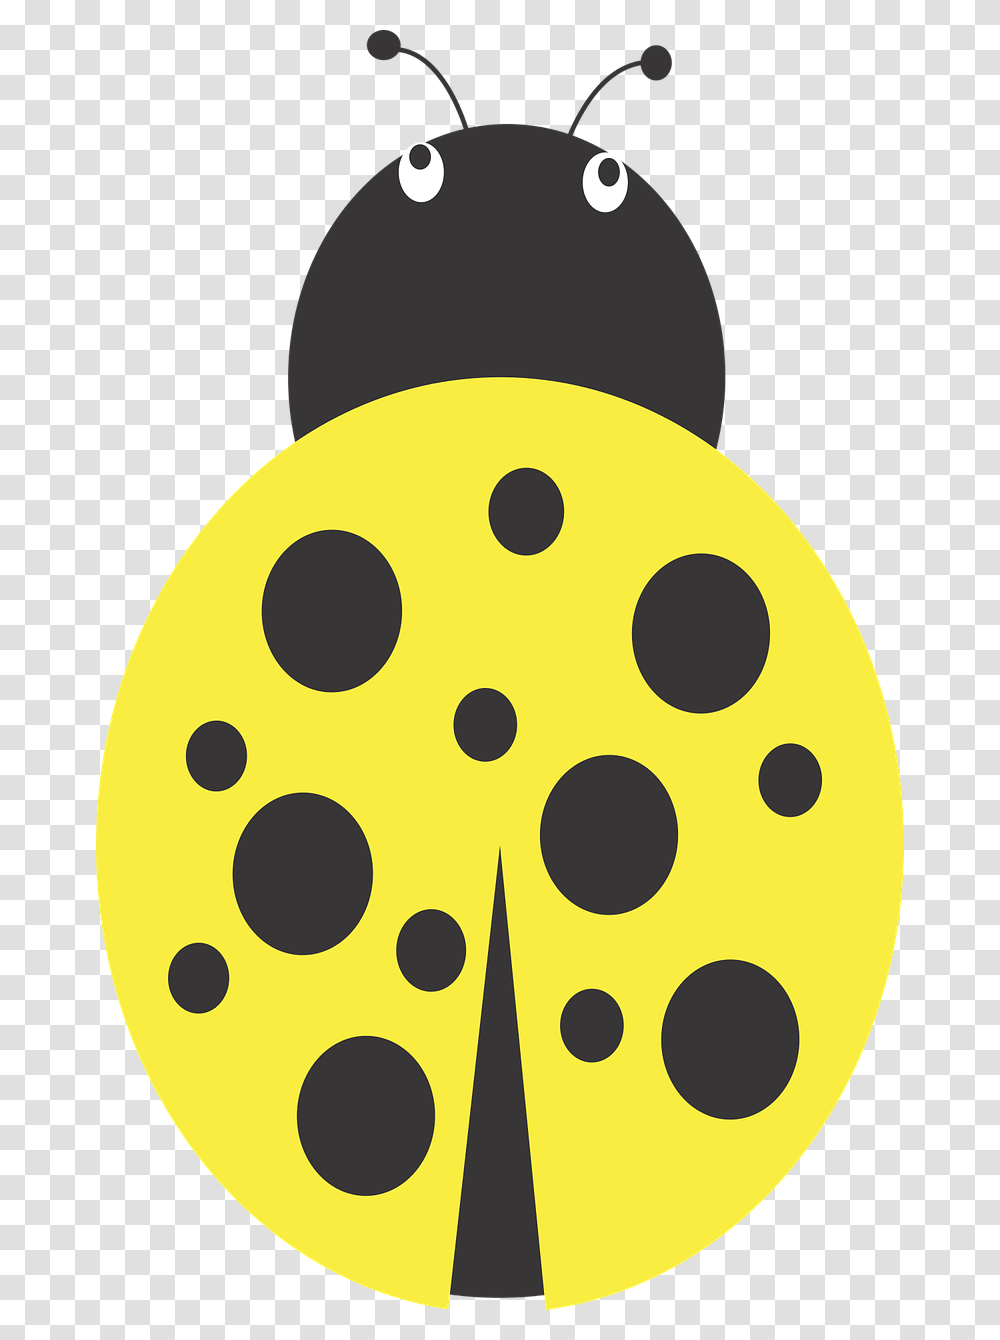 Lady Bug Yellow Cartoon, Egg, Food, Tie, Accessories Transparent Png